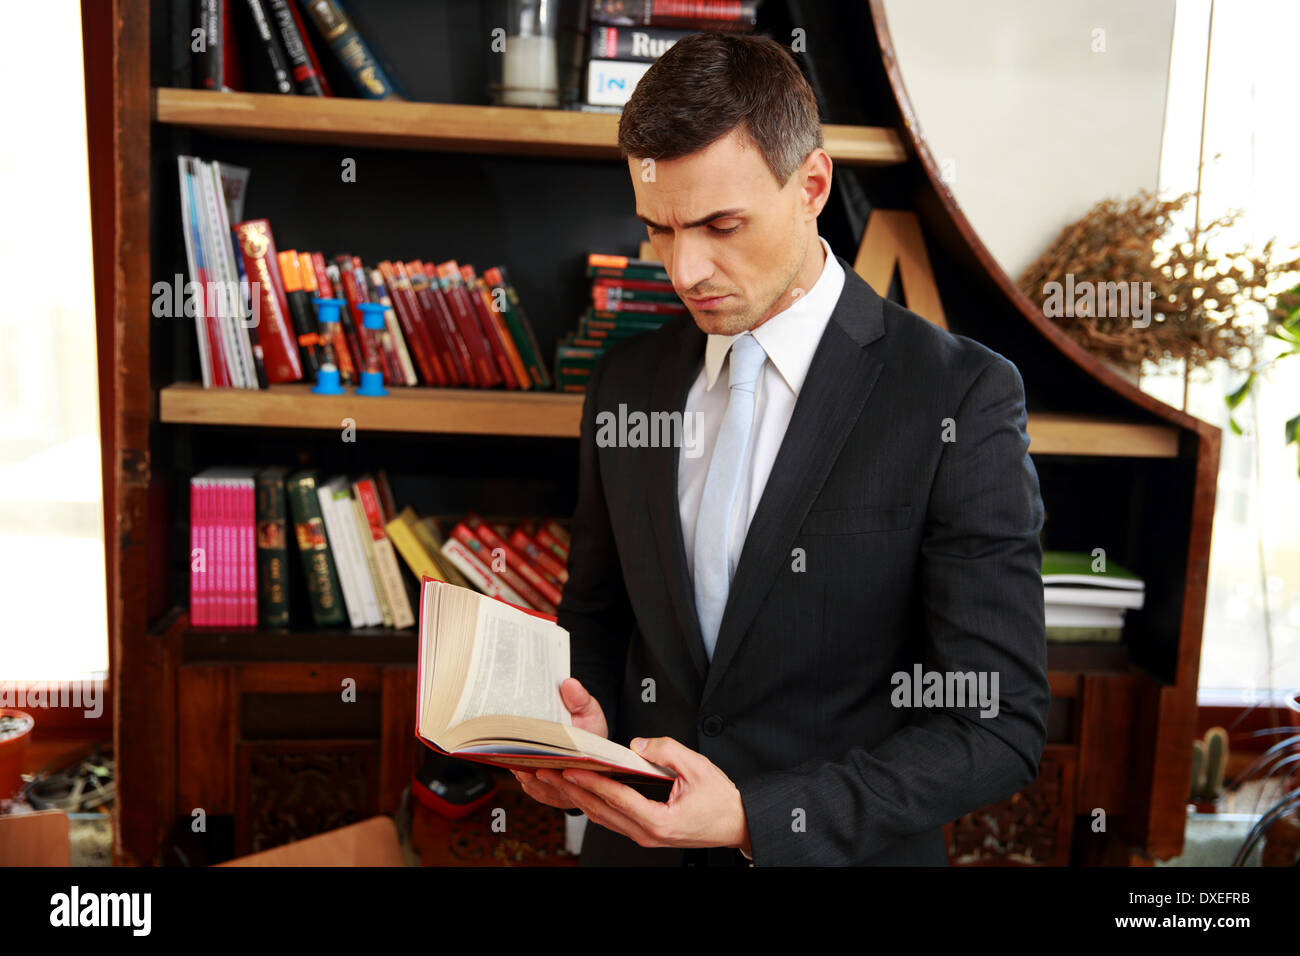 Businessman reading the book Stock Photo